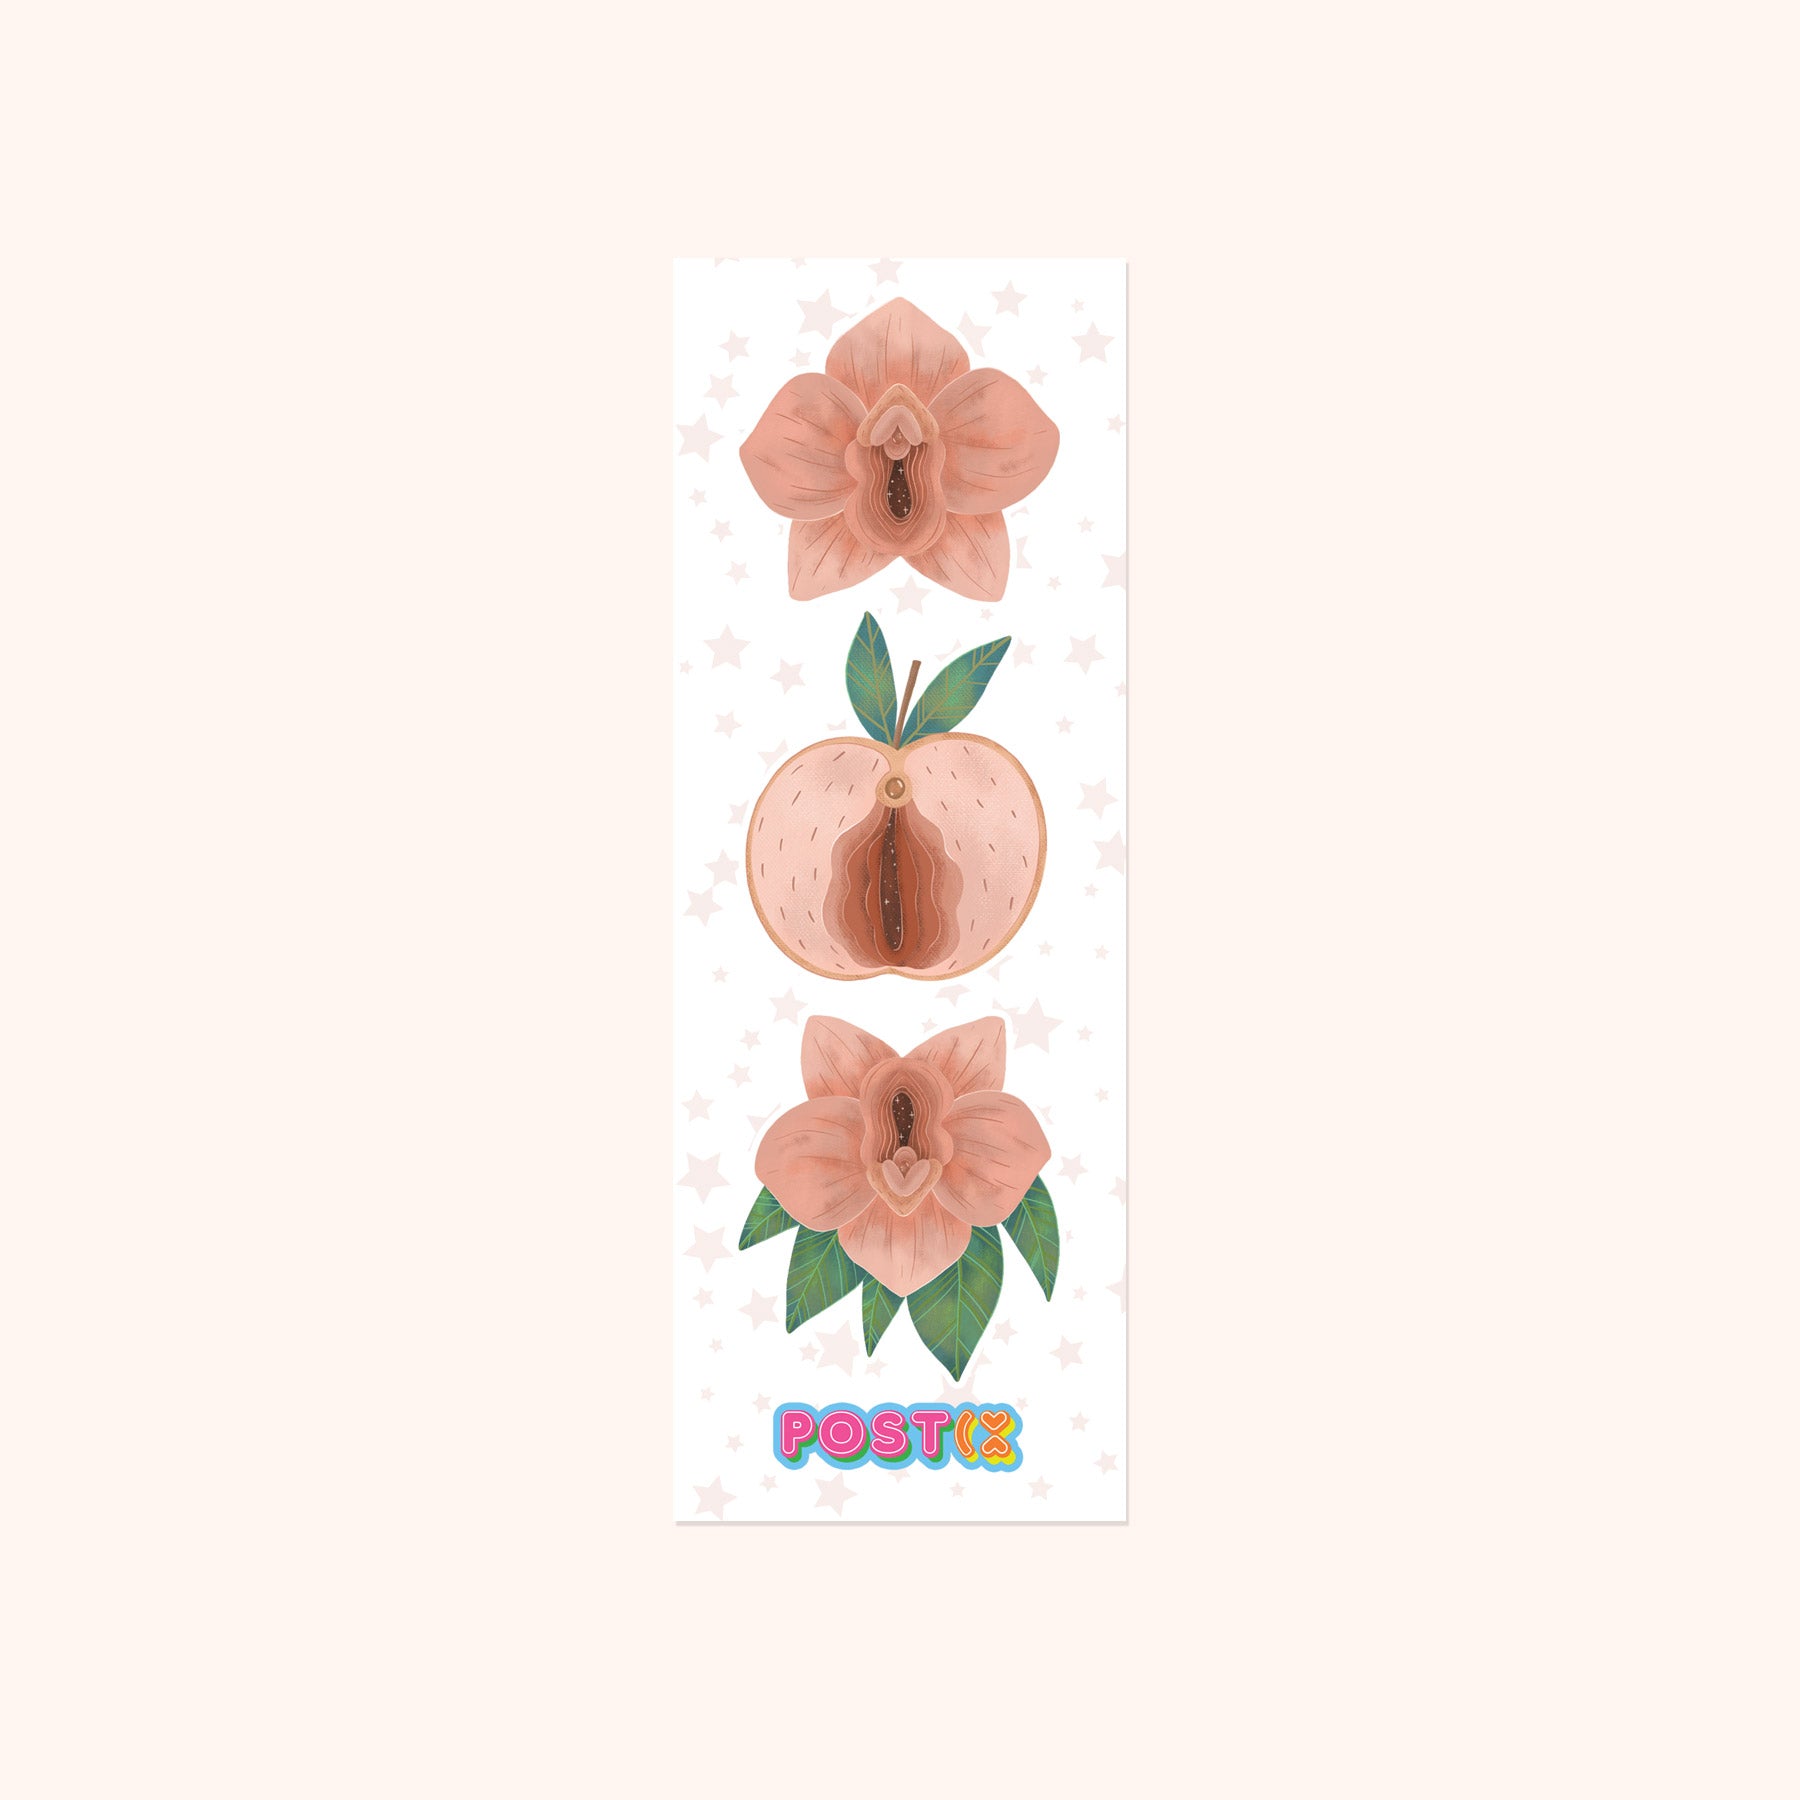 Fruits and Flowers of the Womb Sticker Sheet Strip